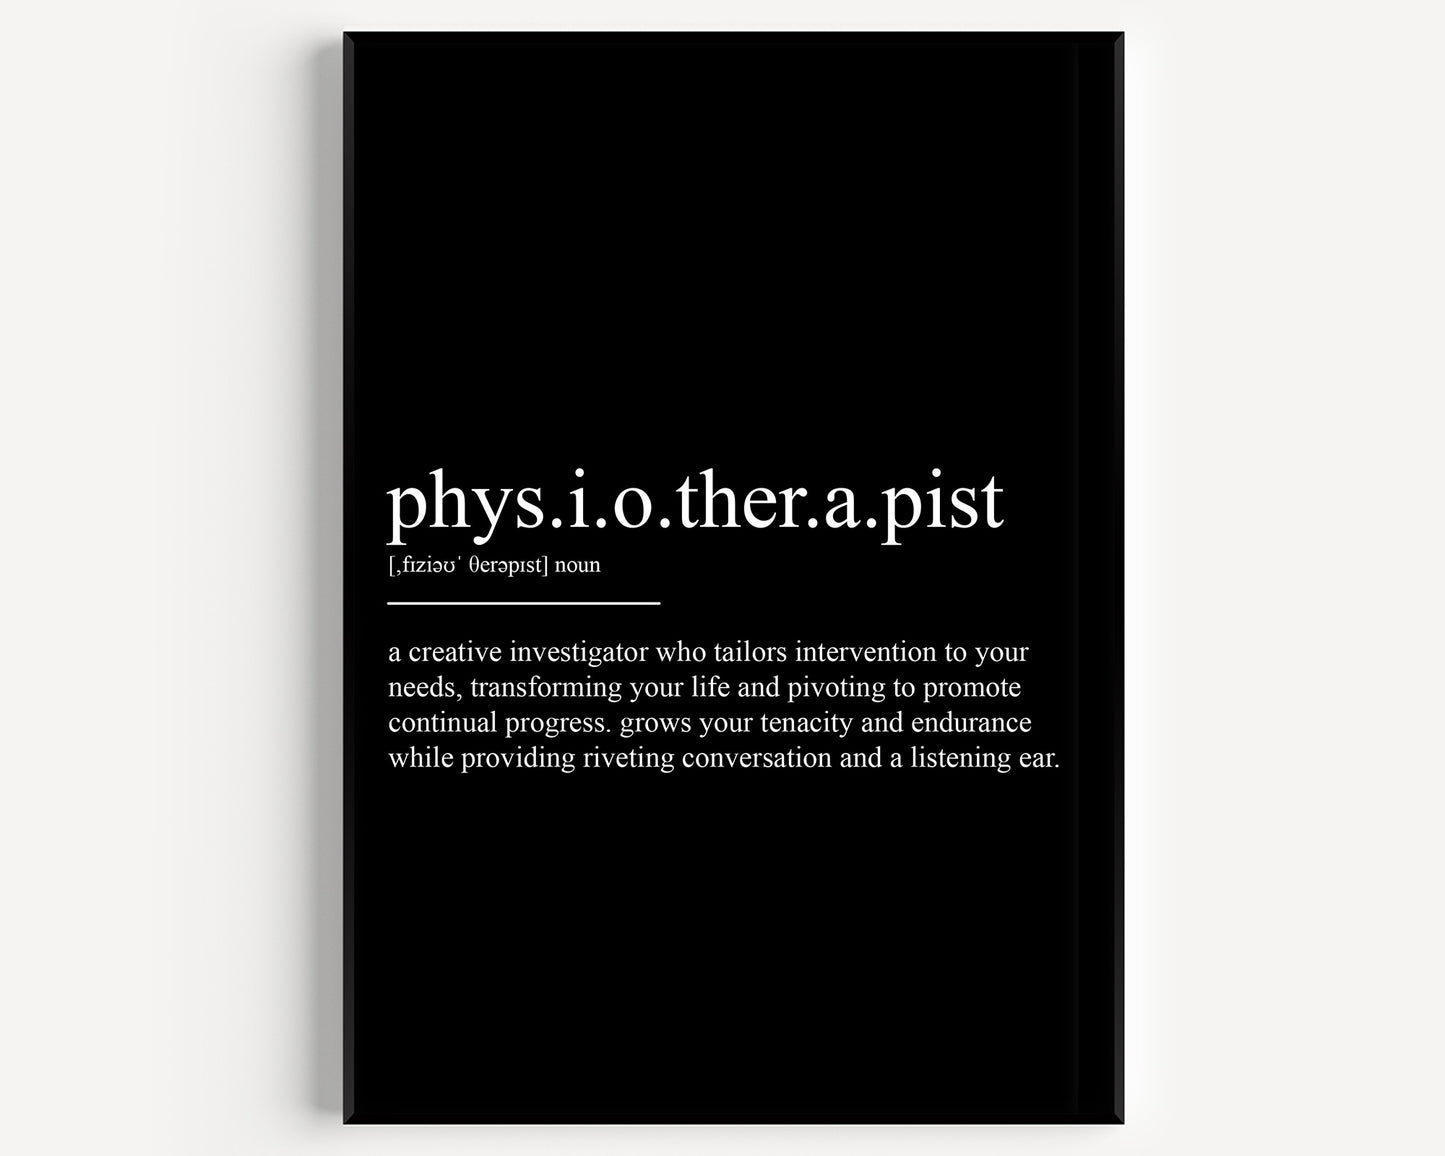 Physiotherapist Definition Print - Magic Posters